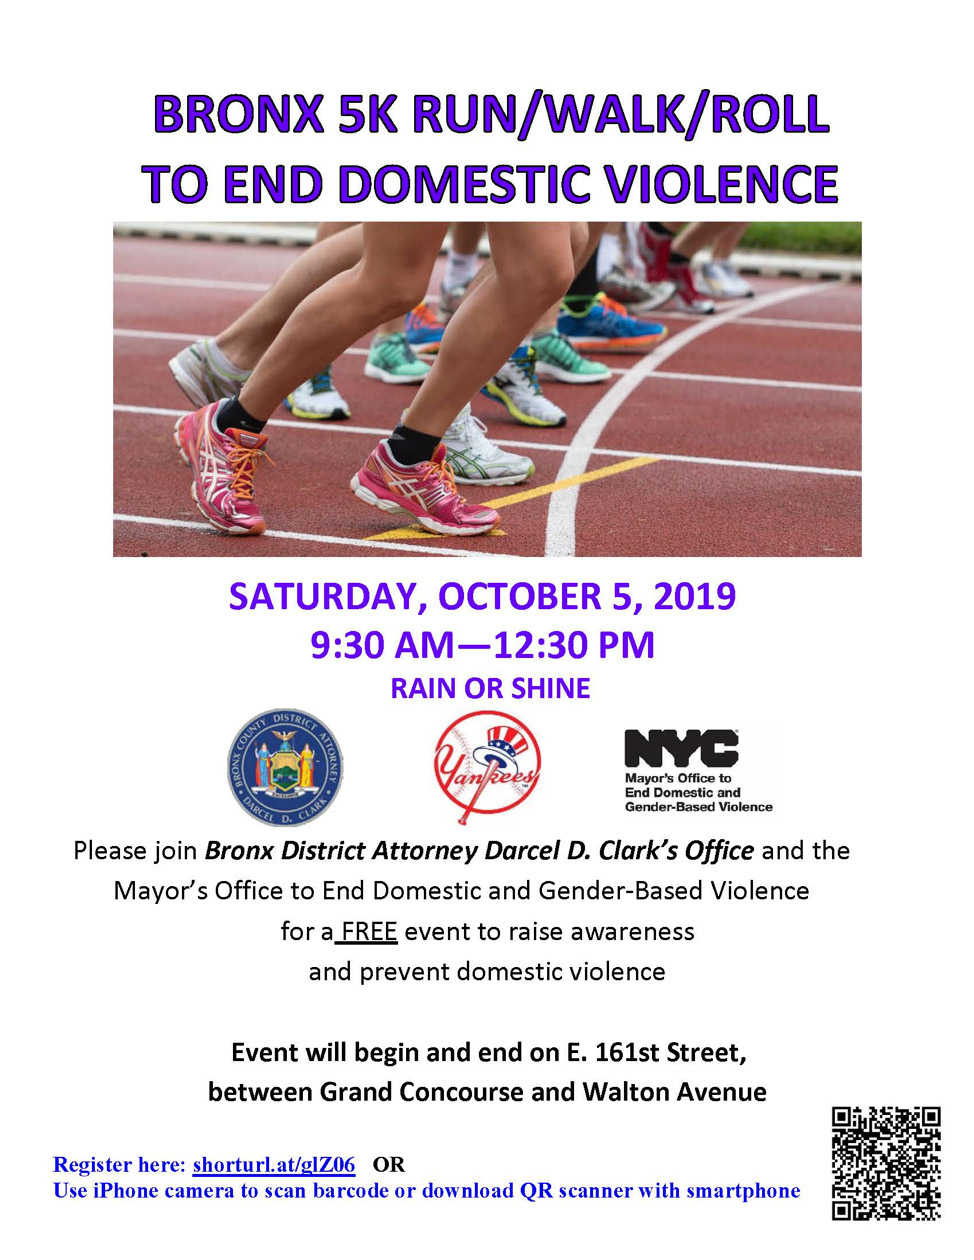 Poster for Bronx 5k to end domestic Violence - Saturday OCtober 5 2019, 9:30 am to 12:30 pm - Rain or Shine. Register at https://www.shorturl.at/glZ06